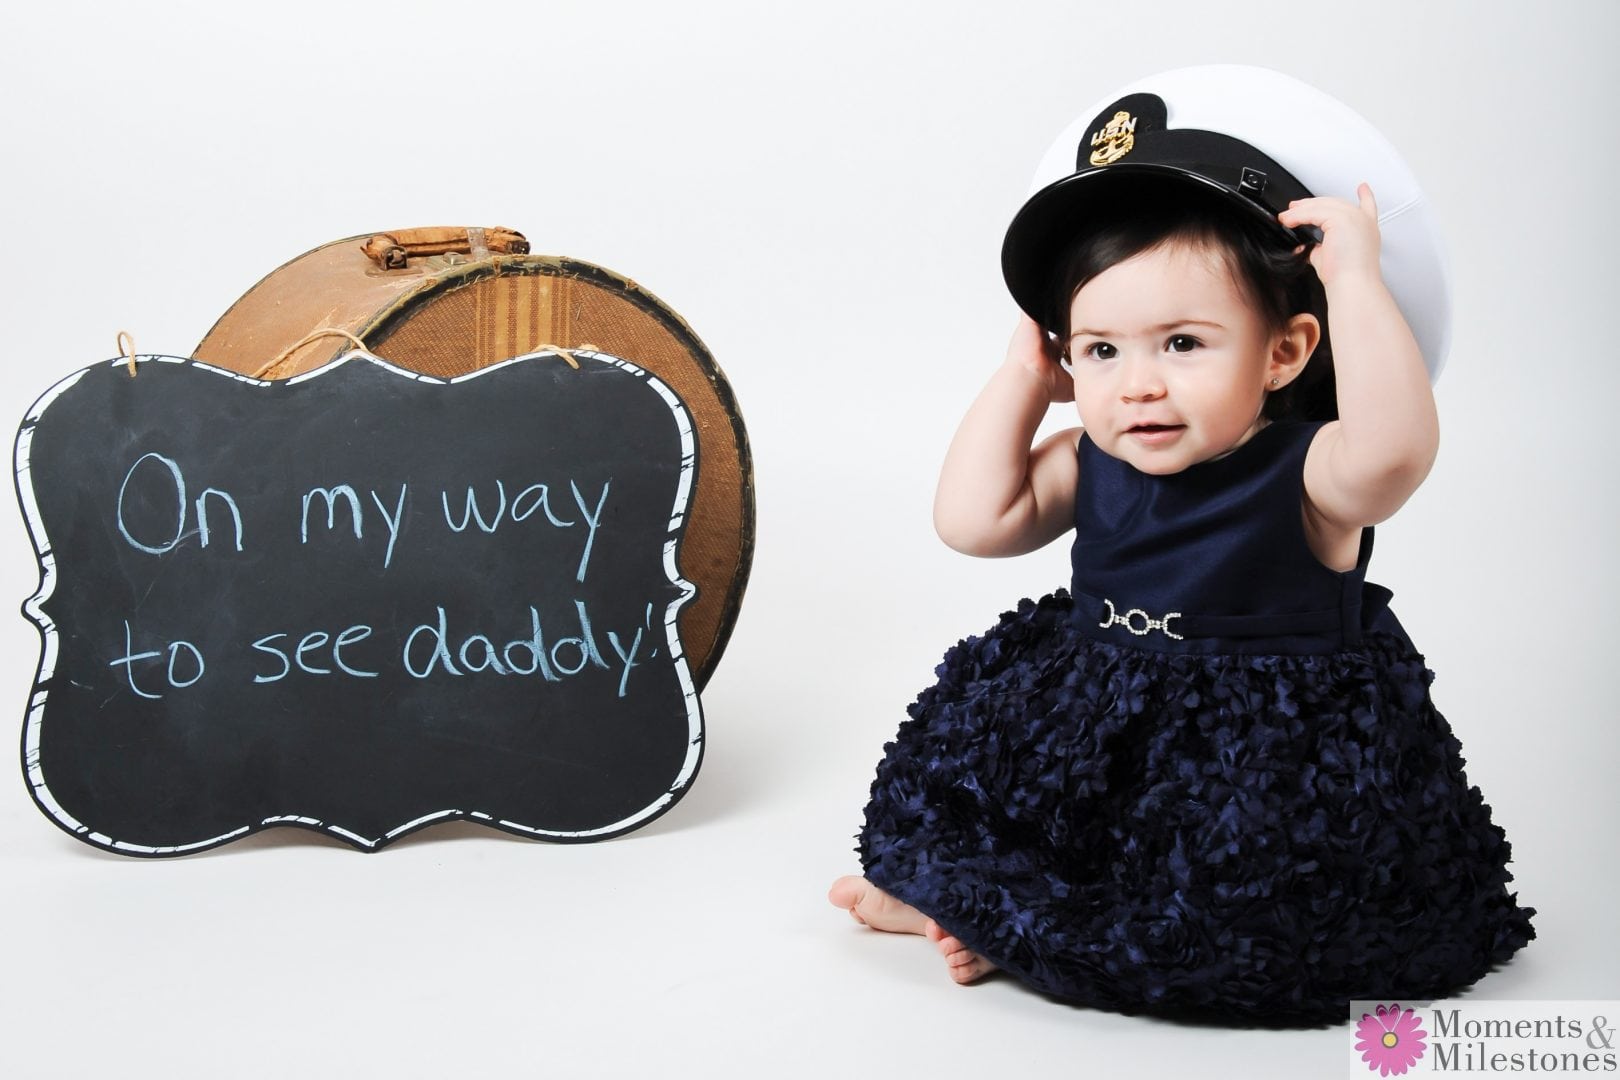 Daddy-Daughter Session for Veteran’s Day